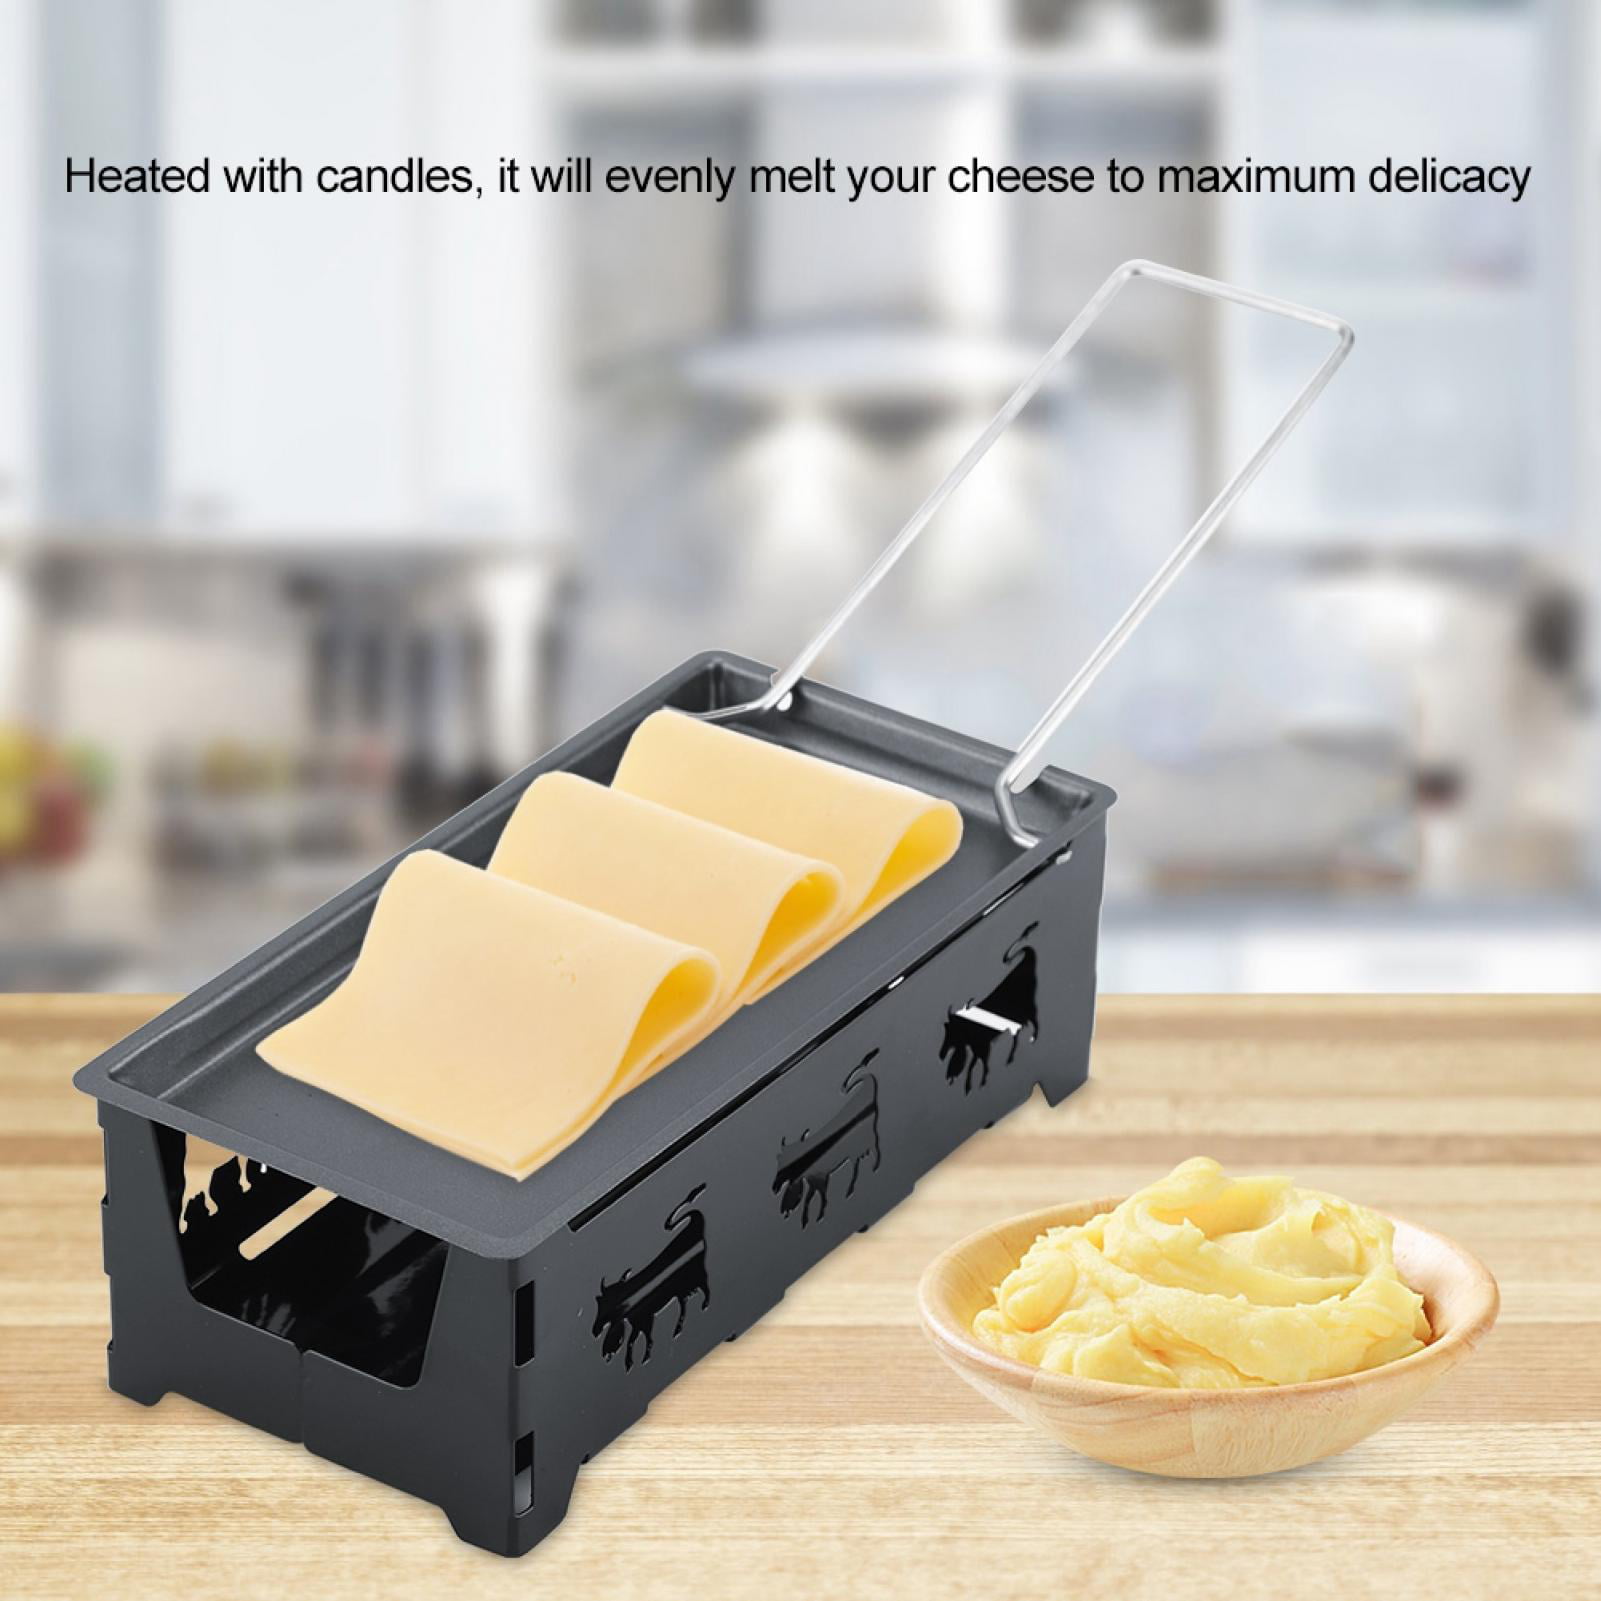 Black Hemoton Raclette Cheese Set Melter Machine Mini Cheese Grill Baking Tray Stove Tea Light Raclette Cookware for Camping Outdoor BBQ